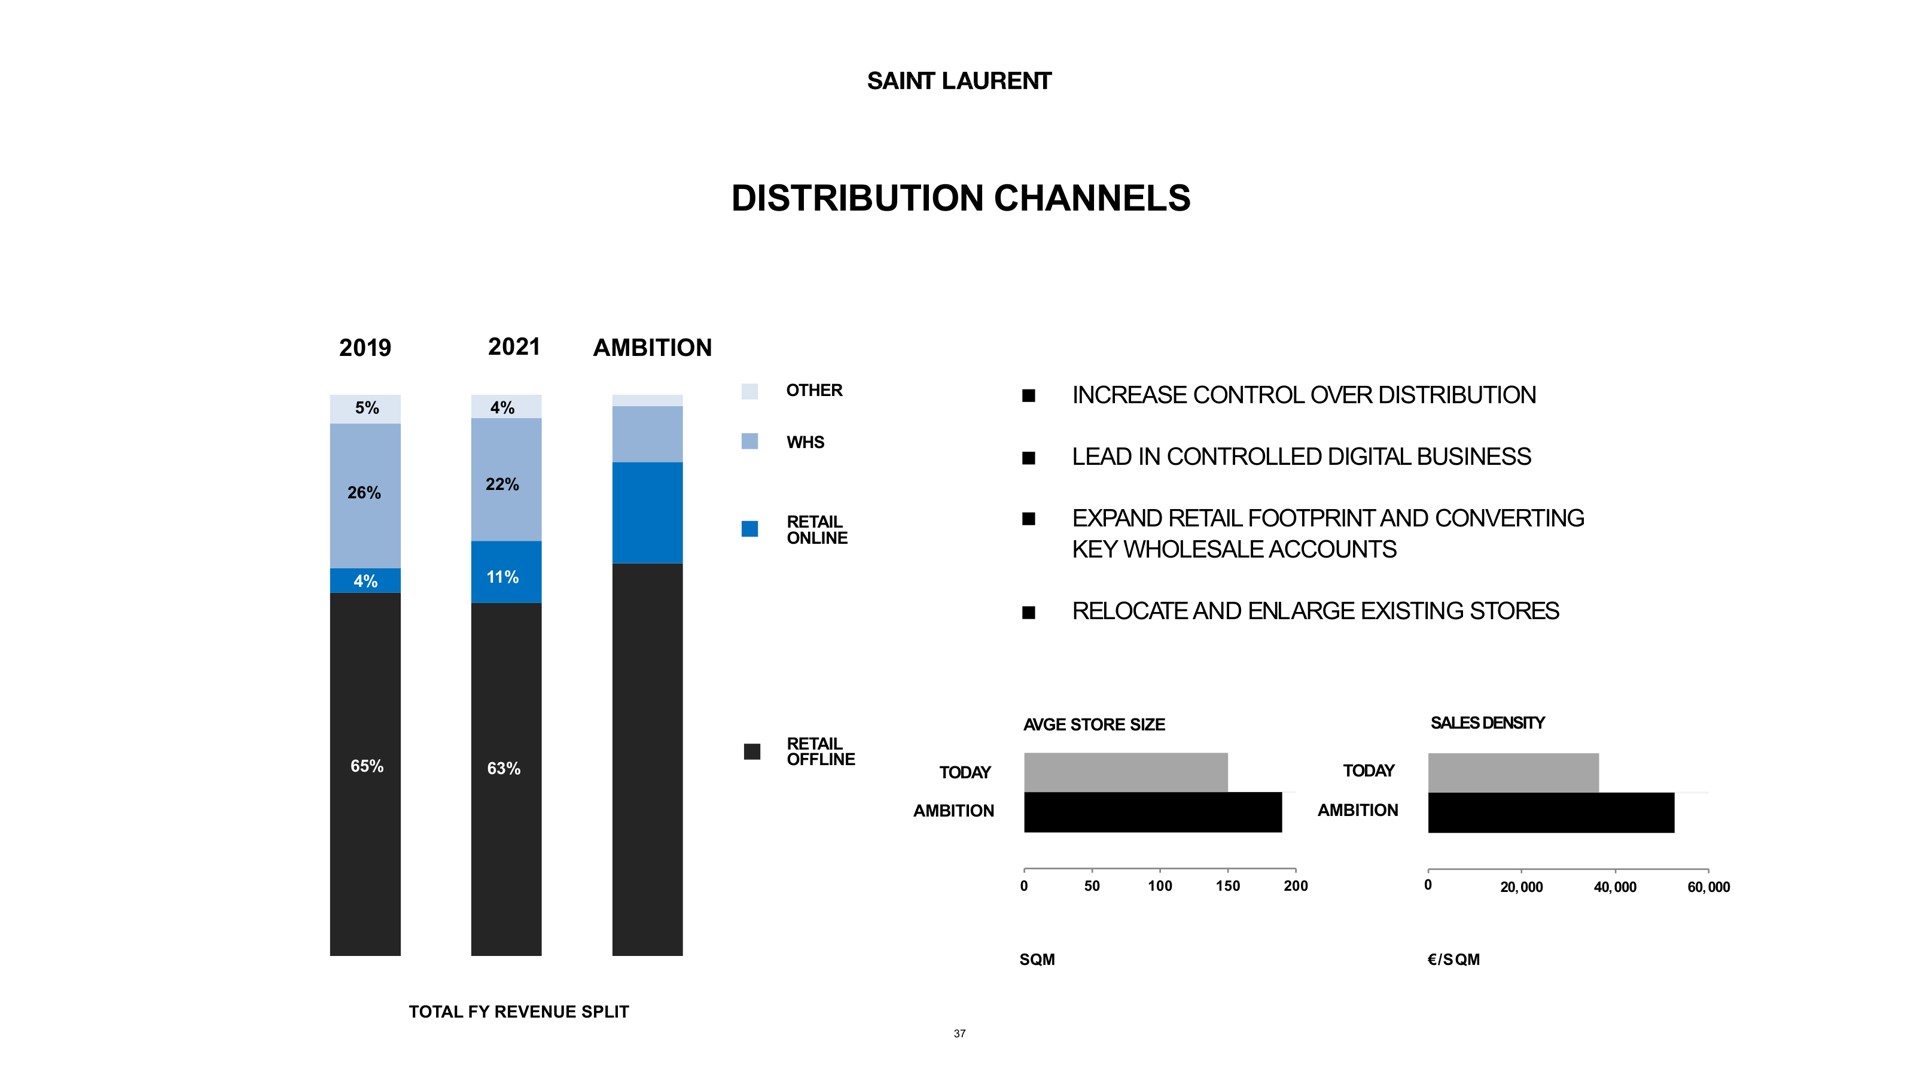 distribution channels ambition other retail increase control over lead in controlled digital business expand retail footprint and converting relocate and enlarge existing stores | Kering